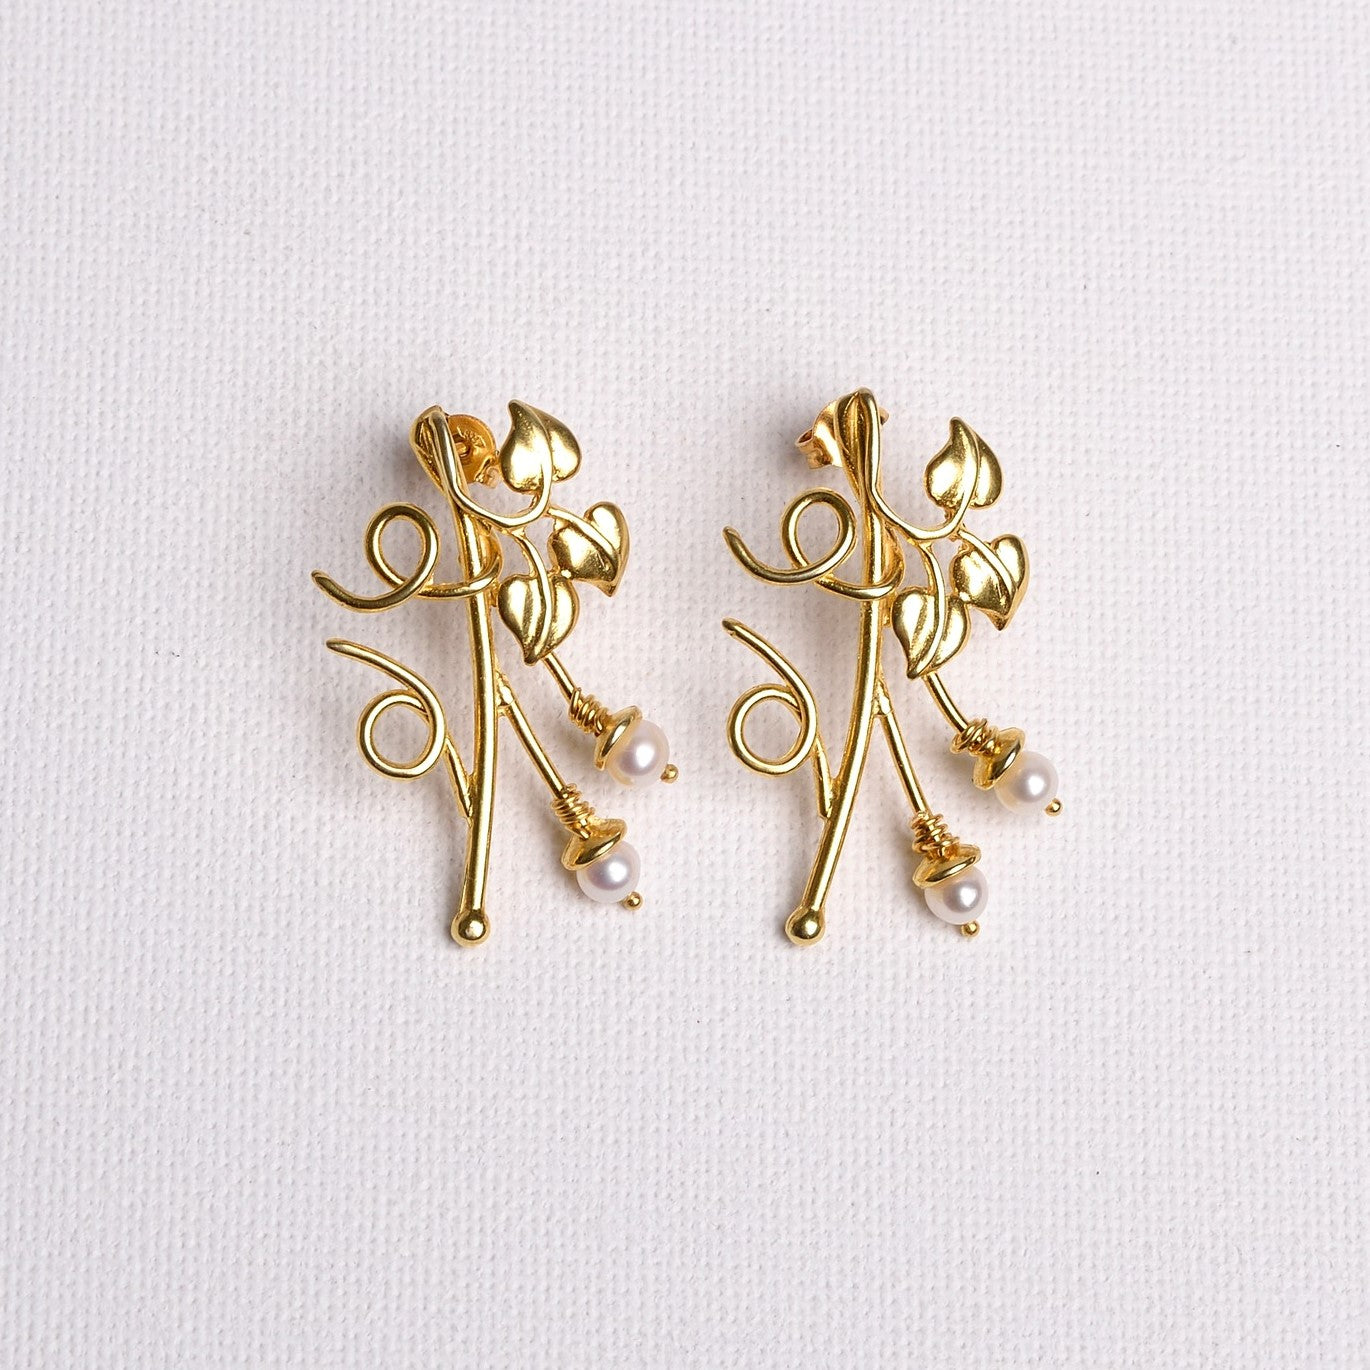 Ivy earrings with pearls gold plated